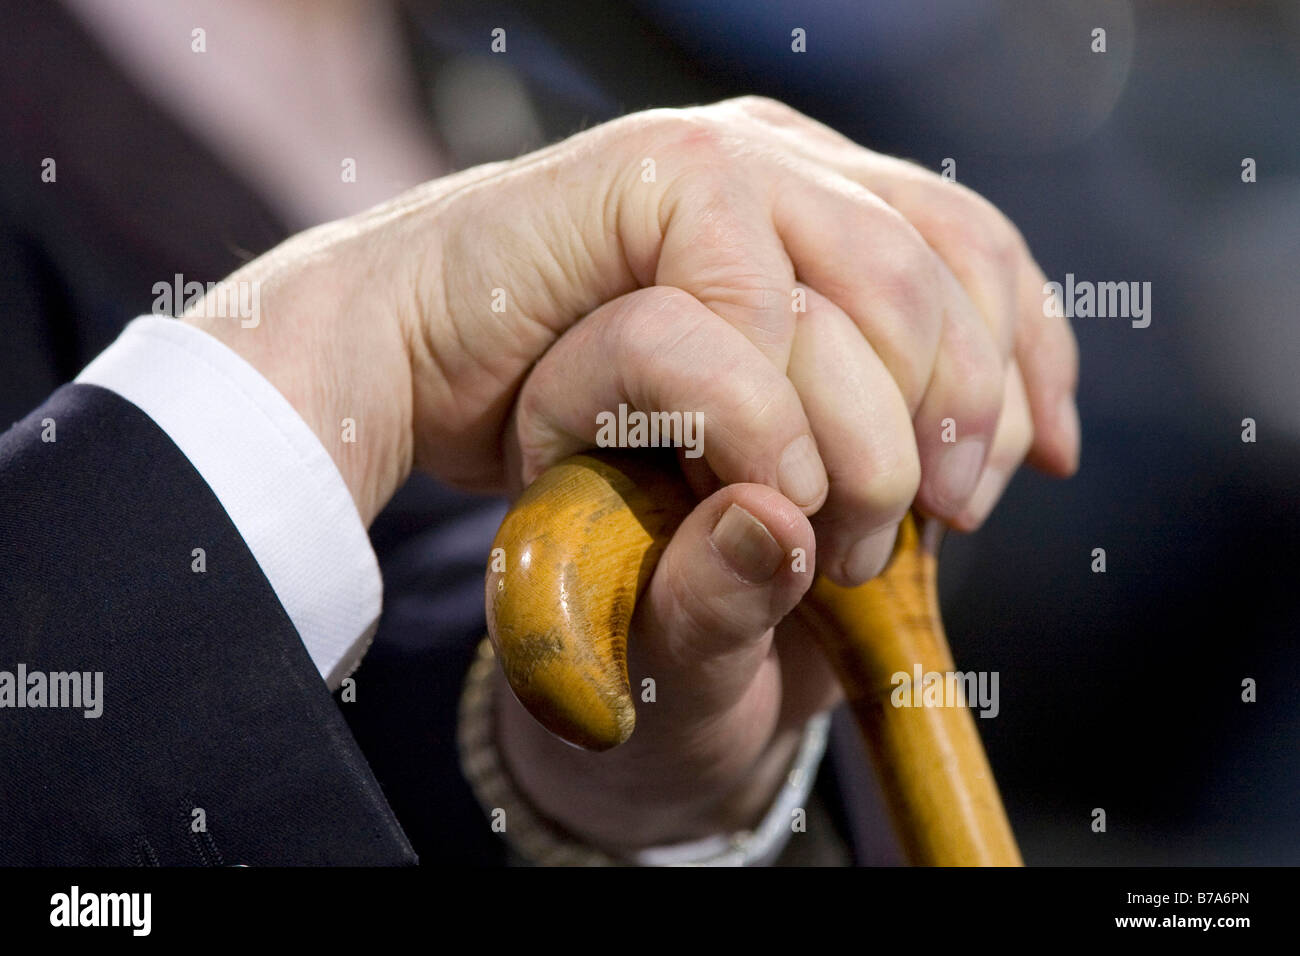 Hands holding a walking stick, former chancellor Helmut Schmidt, SPD, Social Democratic Party of Germany, in Passau, Germany, E Stock Photo